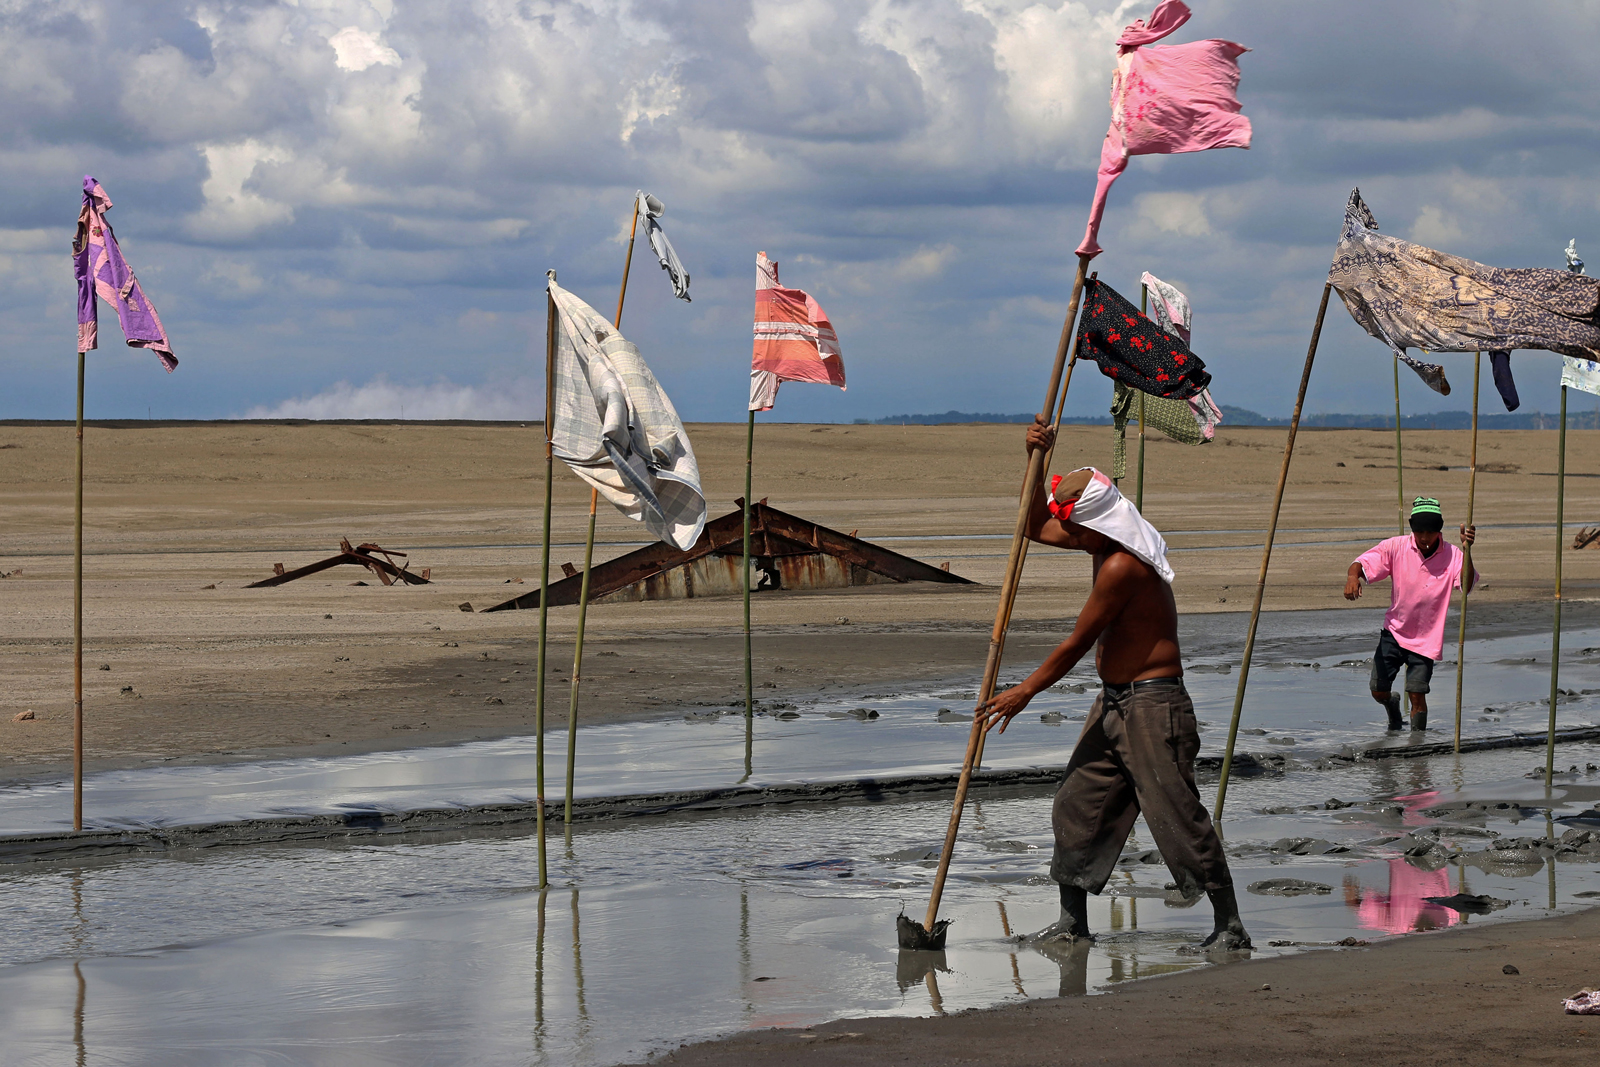 Two artists are on a beach in Sidoarjo, East Java, Indonesia putting out coloured flags into the sand.